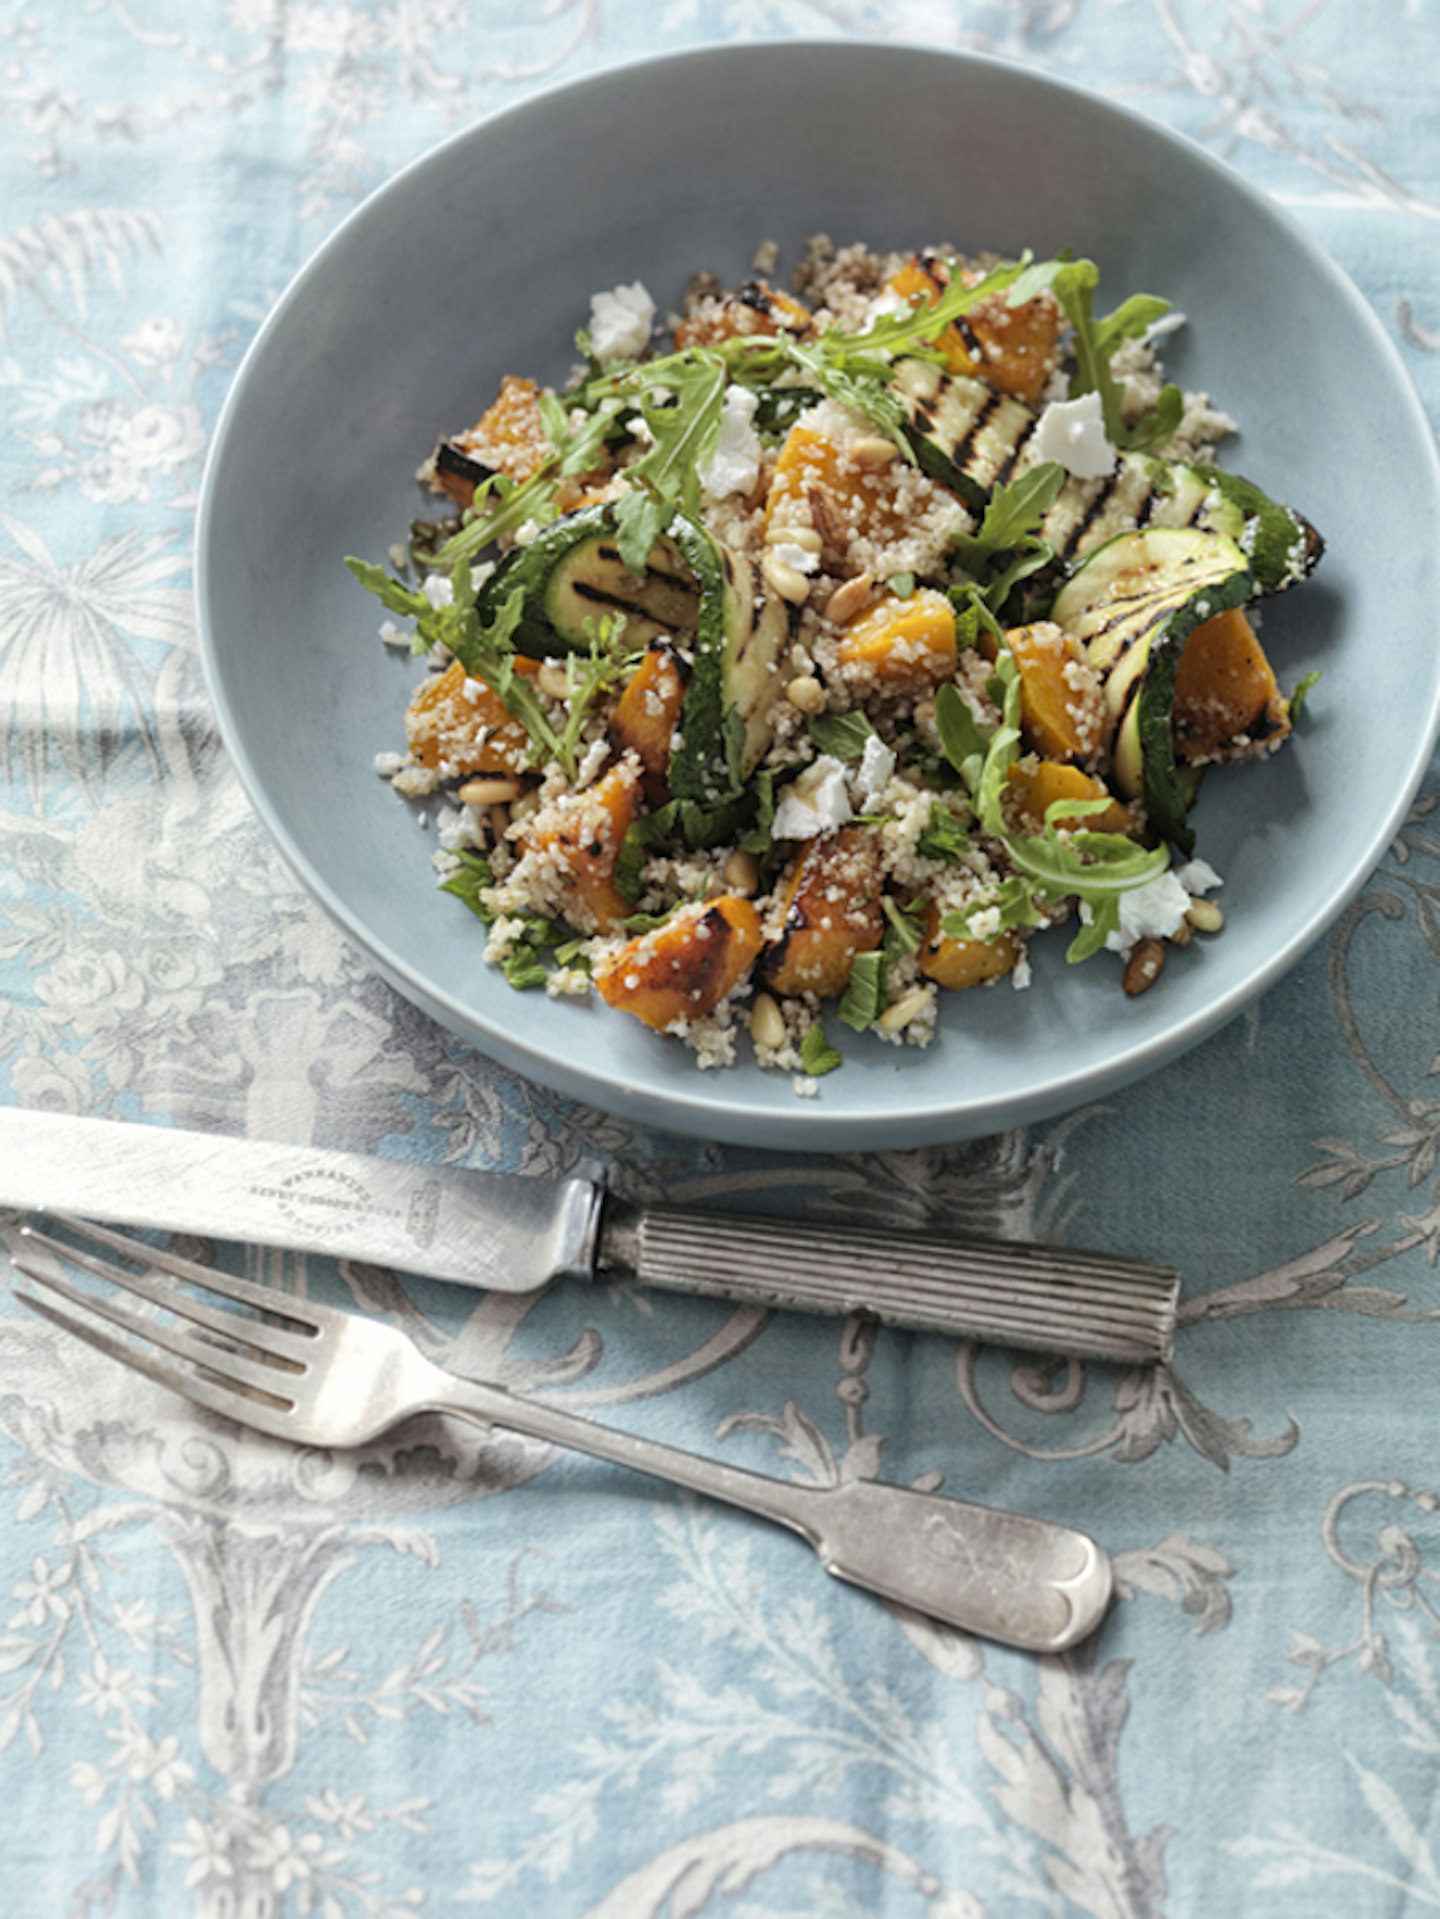 Rosemary-roasted butternut, courgette, amaranth and barley couscous salad